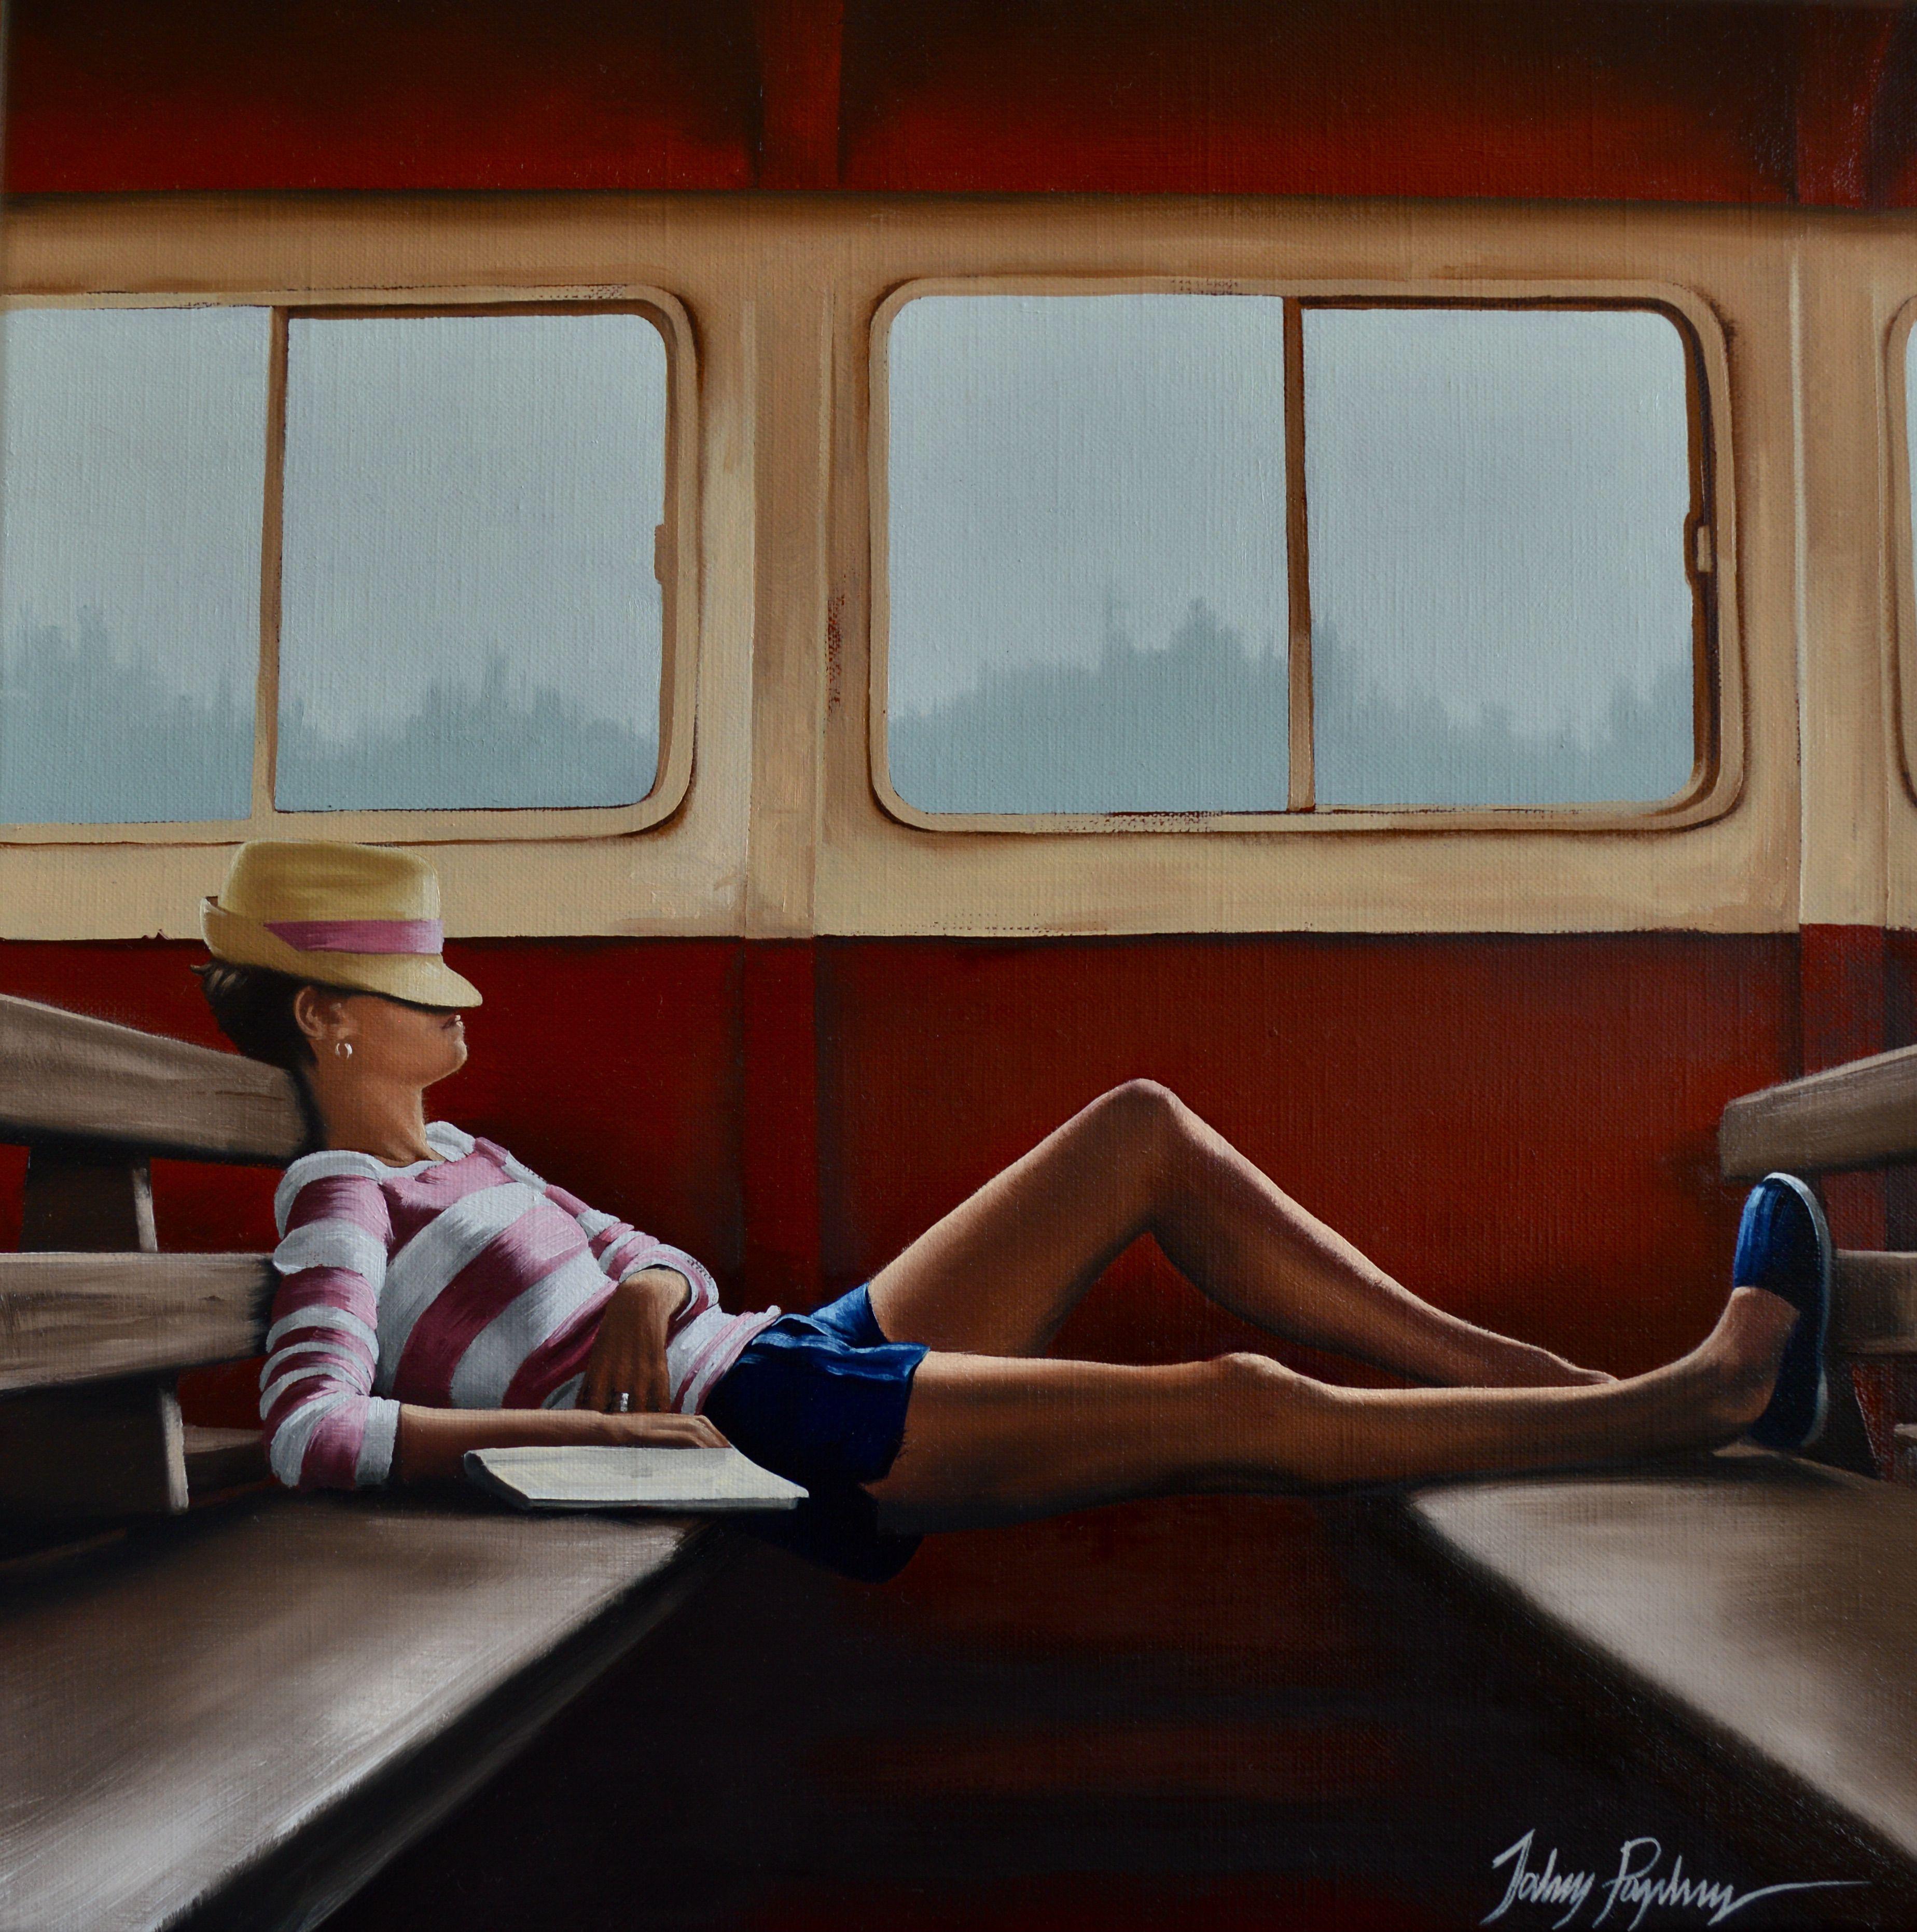 Sleeper Carriage, Painting, Oil on Canvas For Sale 2